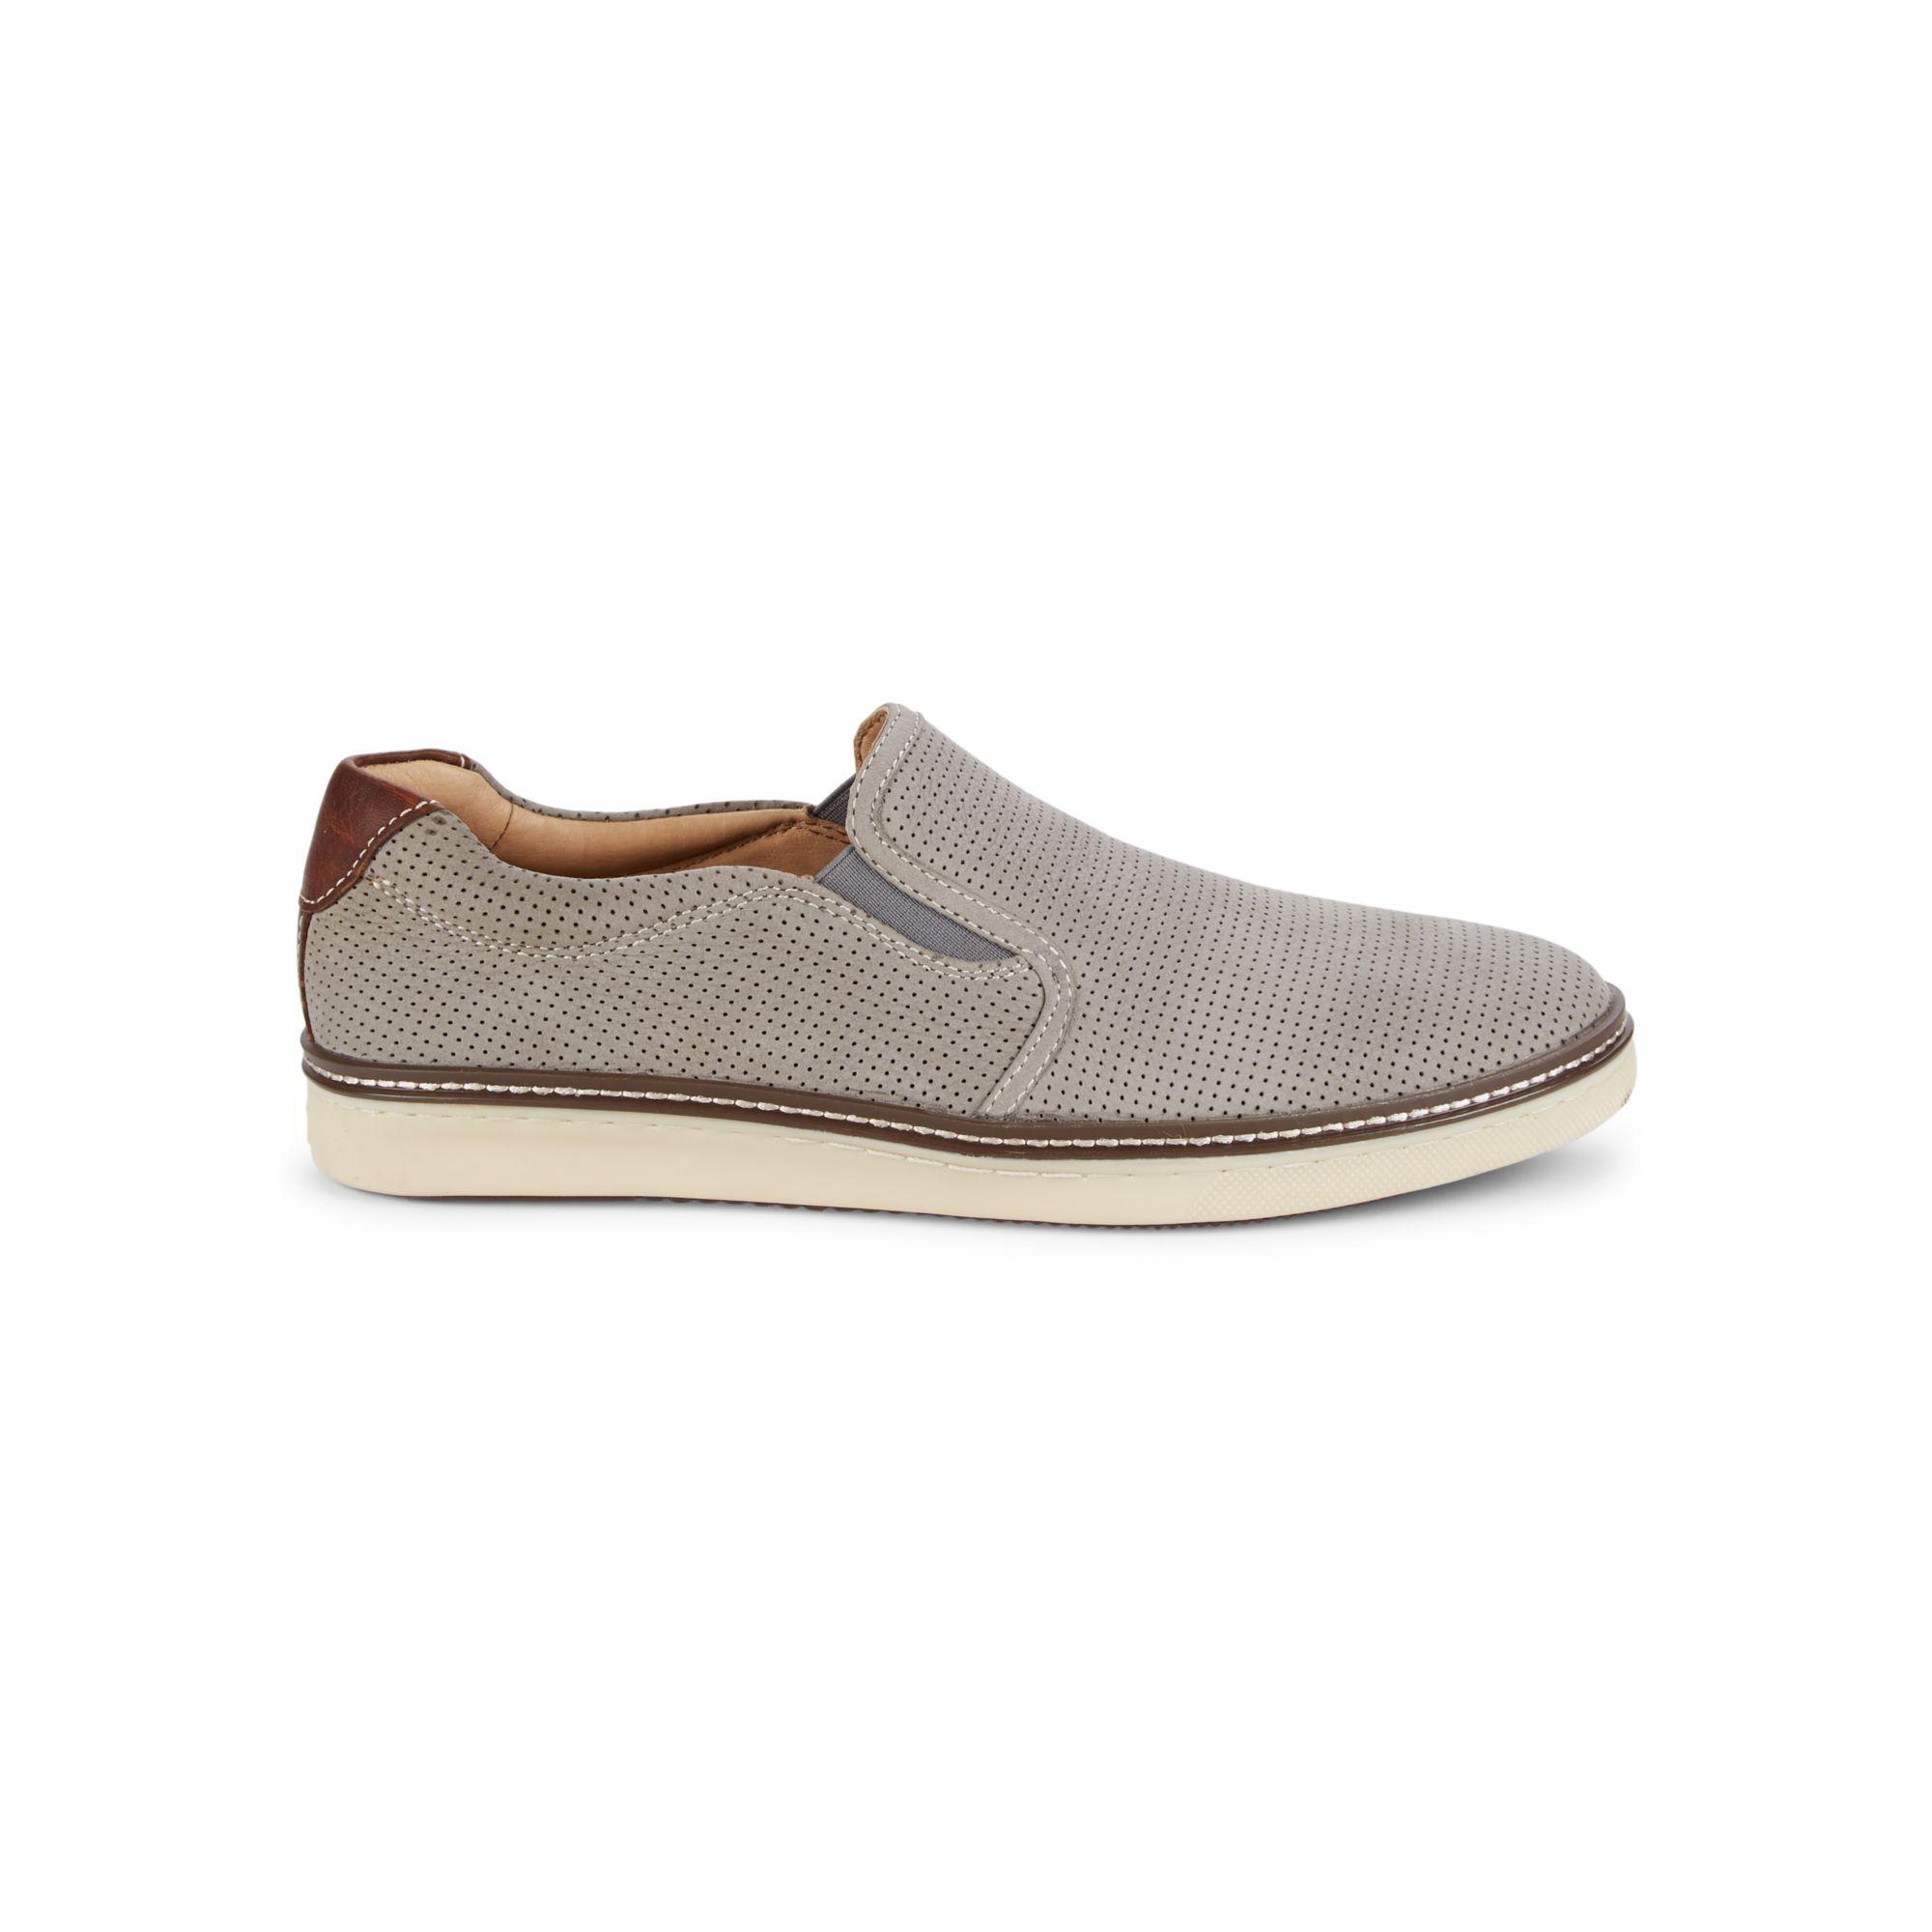 Johnston & Murphy Culling Perforated Suede Slip-on Sneakers in Grey ...